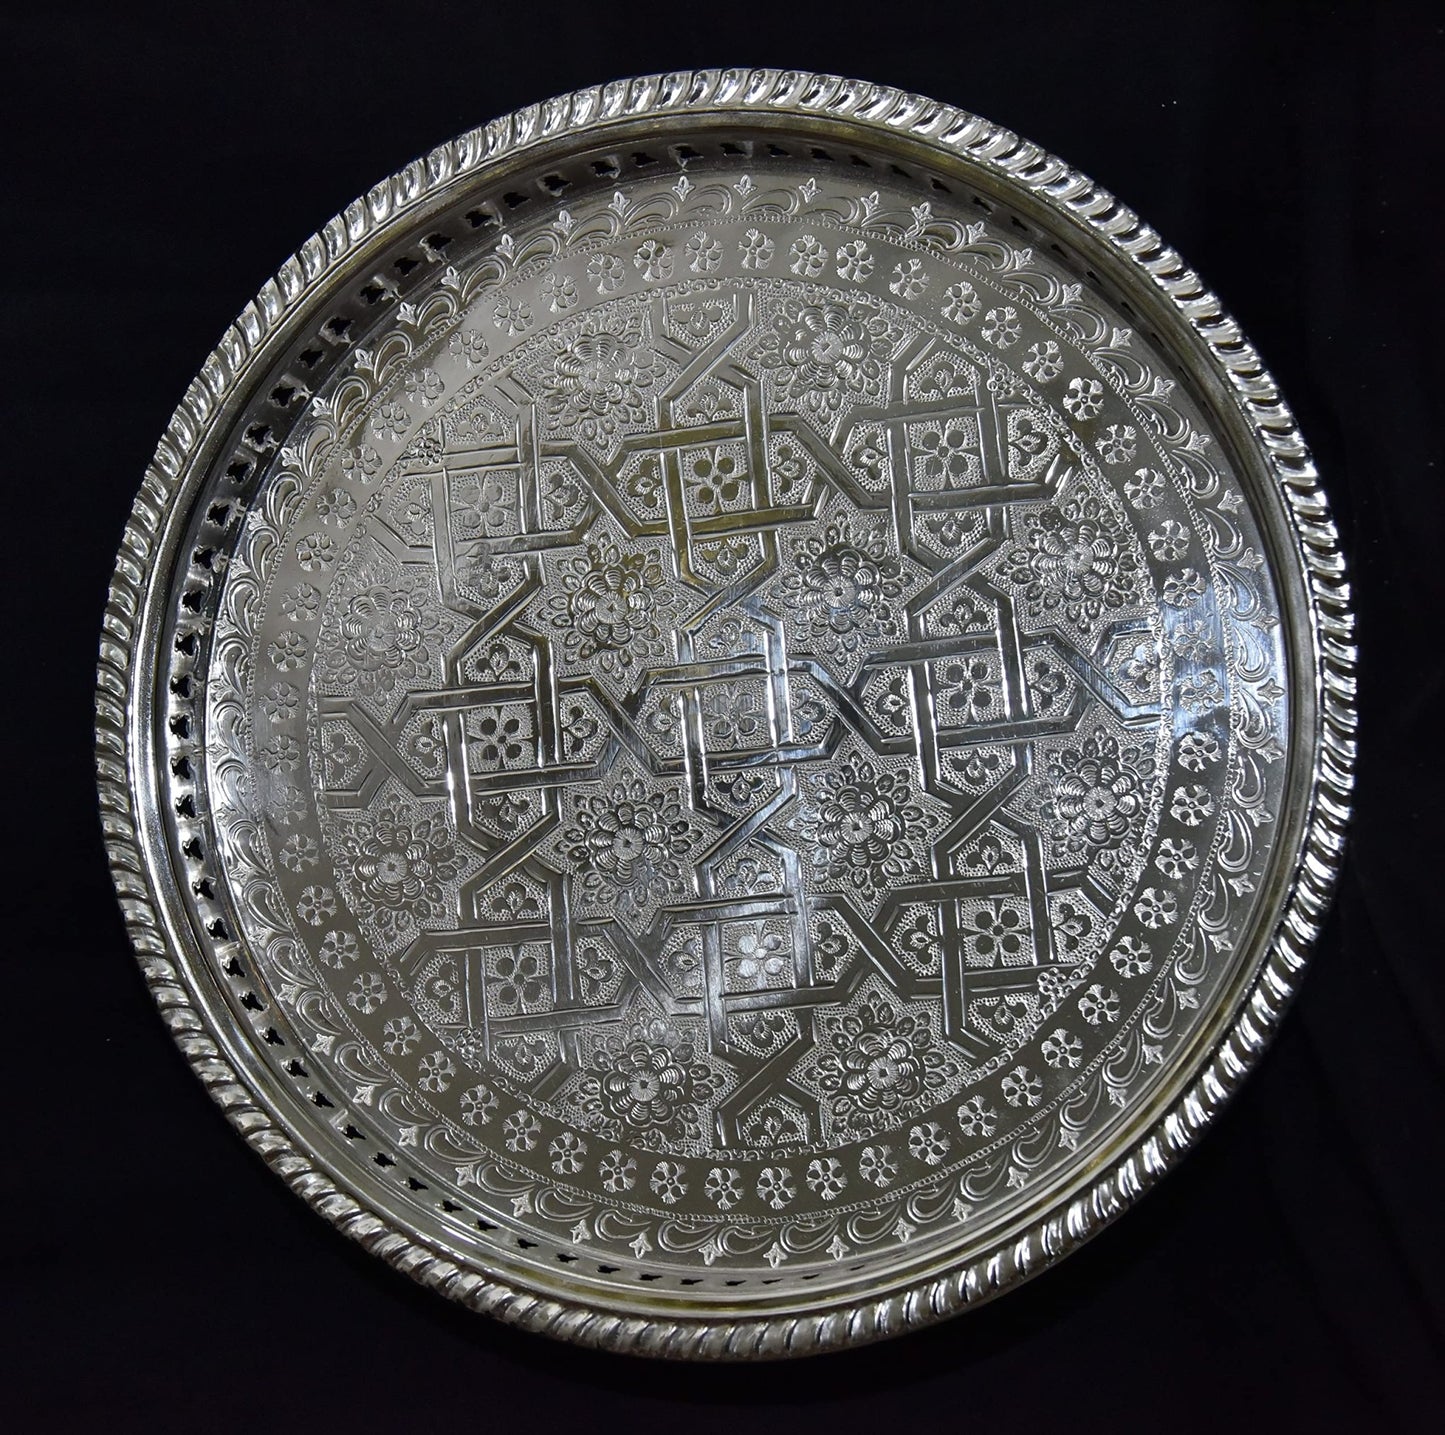 Moroccan 10.2 Inch Handmade Serving Brass Tea Tray Silver Plated Handcrafted Plate Fez Morocco - Handmade by My Poufs